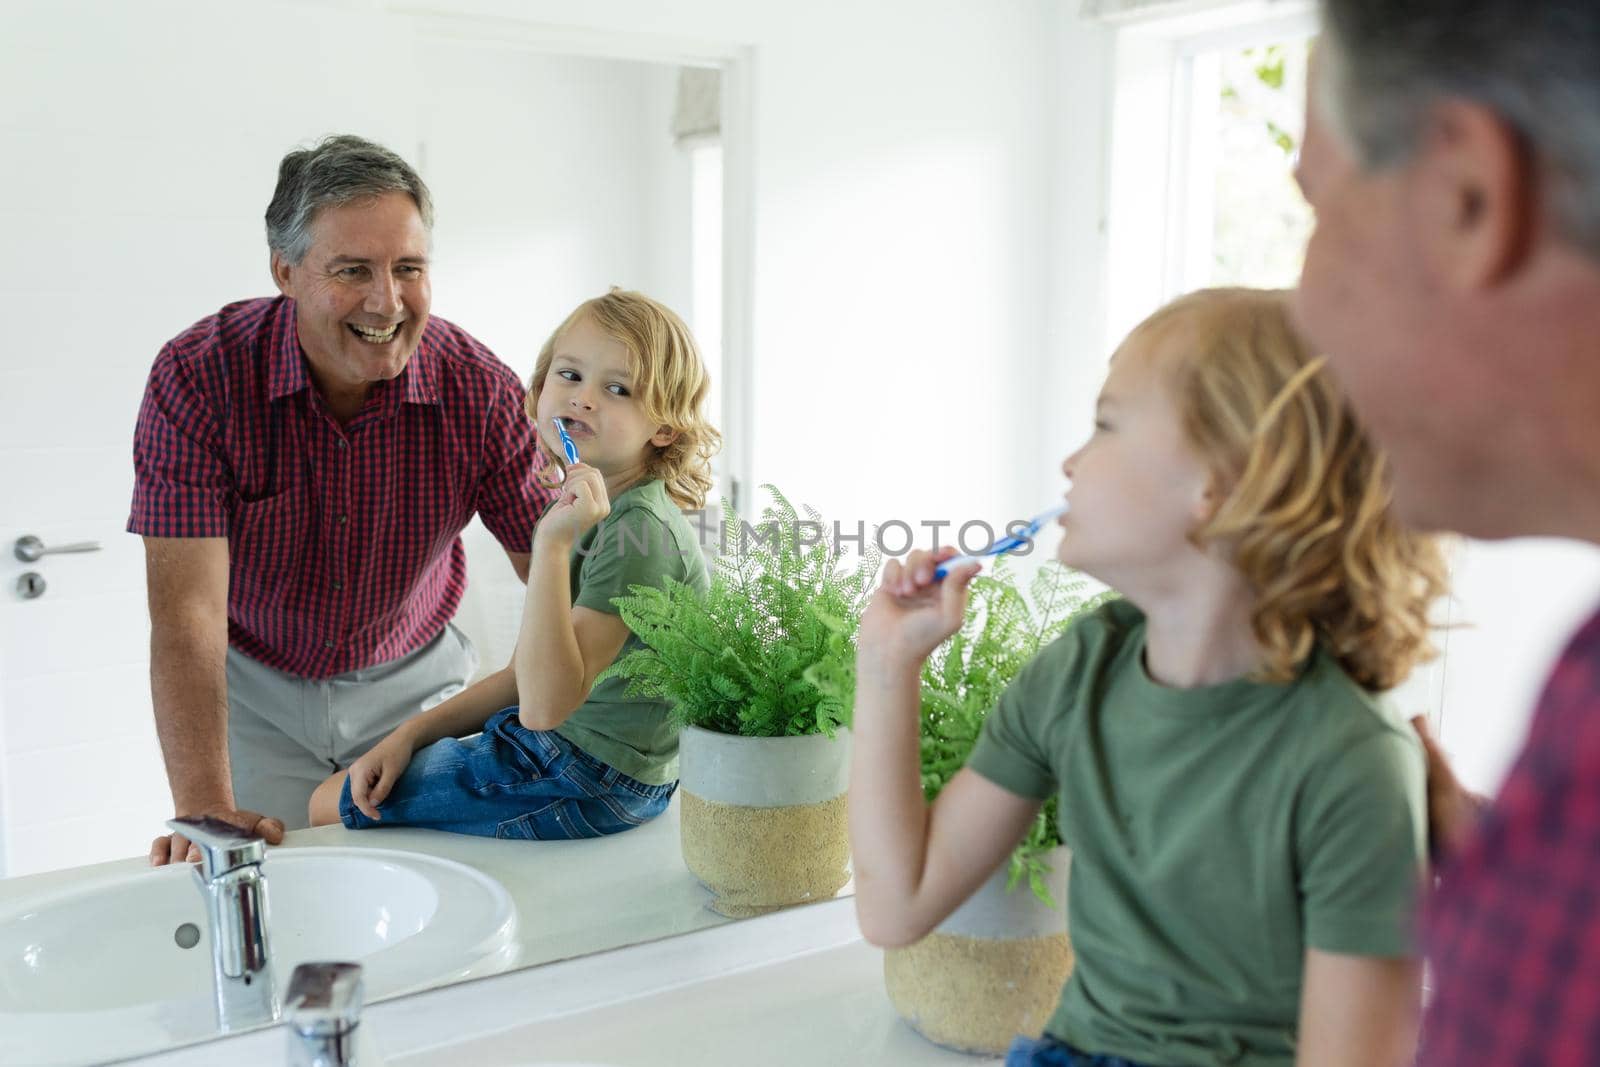 Smiling caucasian grandfather in bathroom with grandson brushing teeth both looking in mirror. staying at home in isolation during quarantine lockdown.